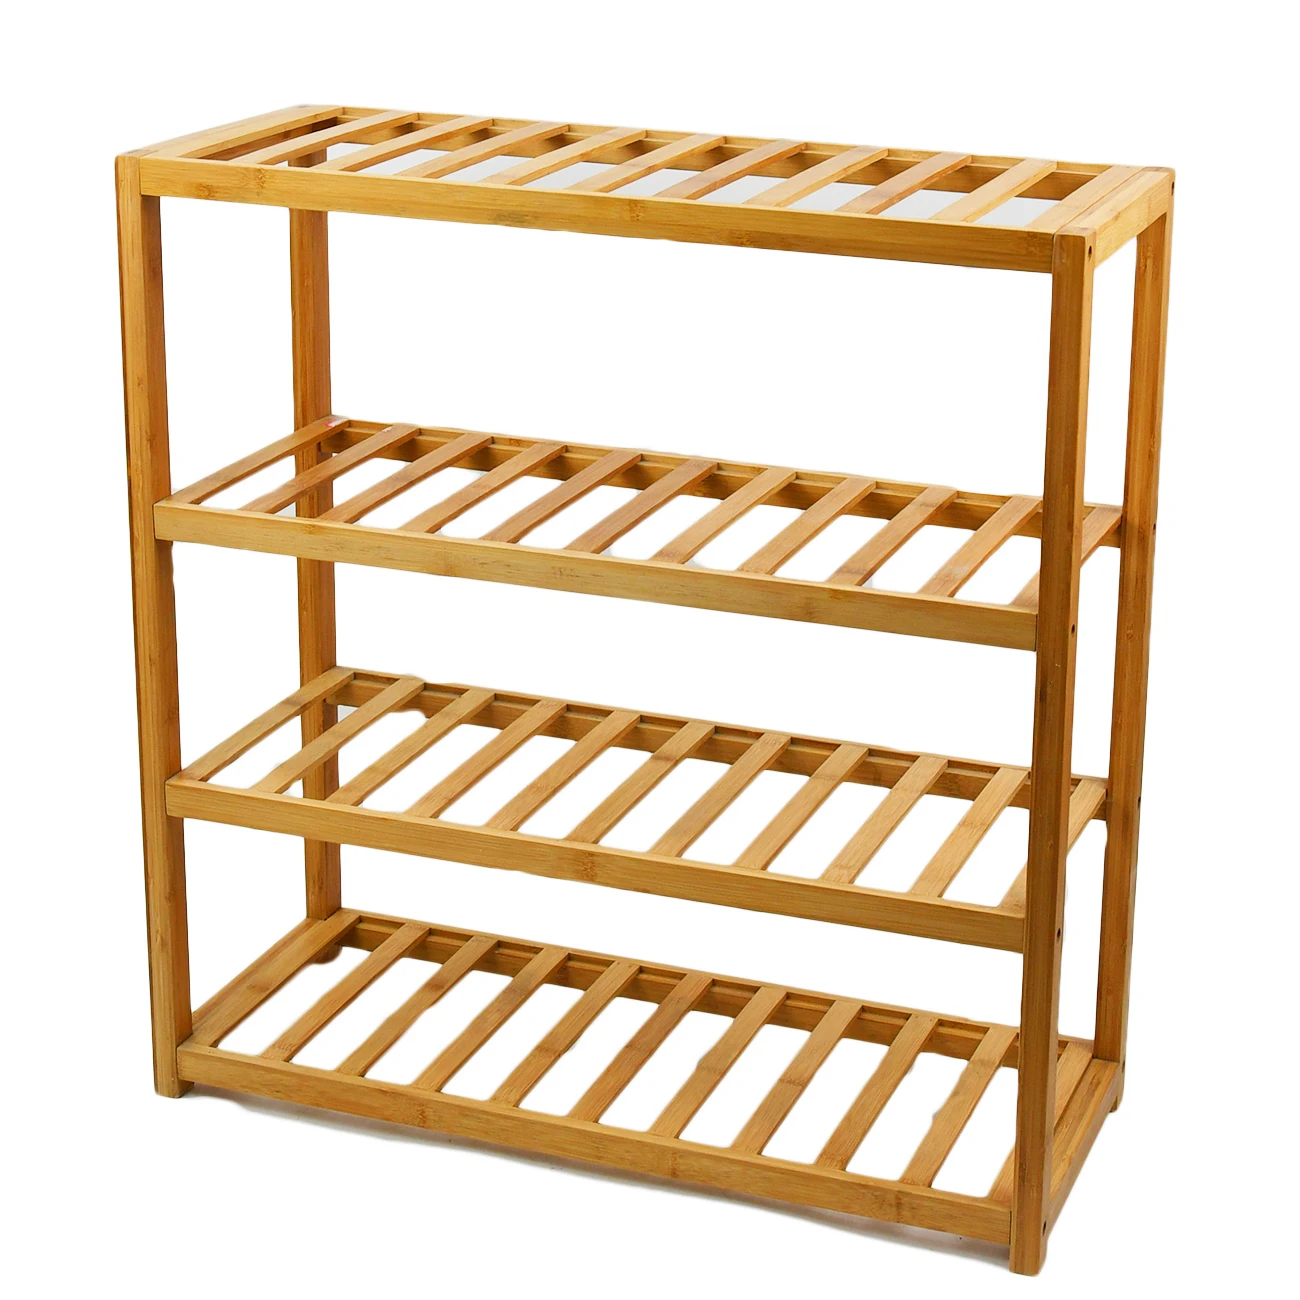 Hot sale cheap bamboo wooden shoe rack display designs wood